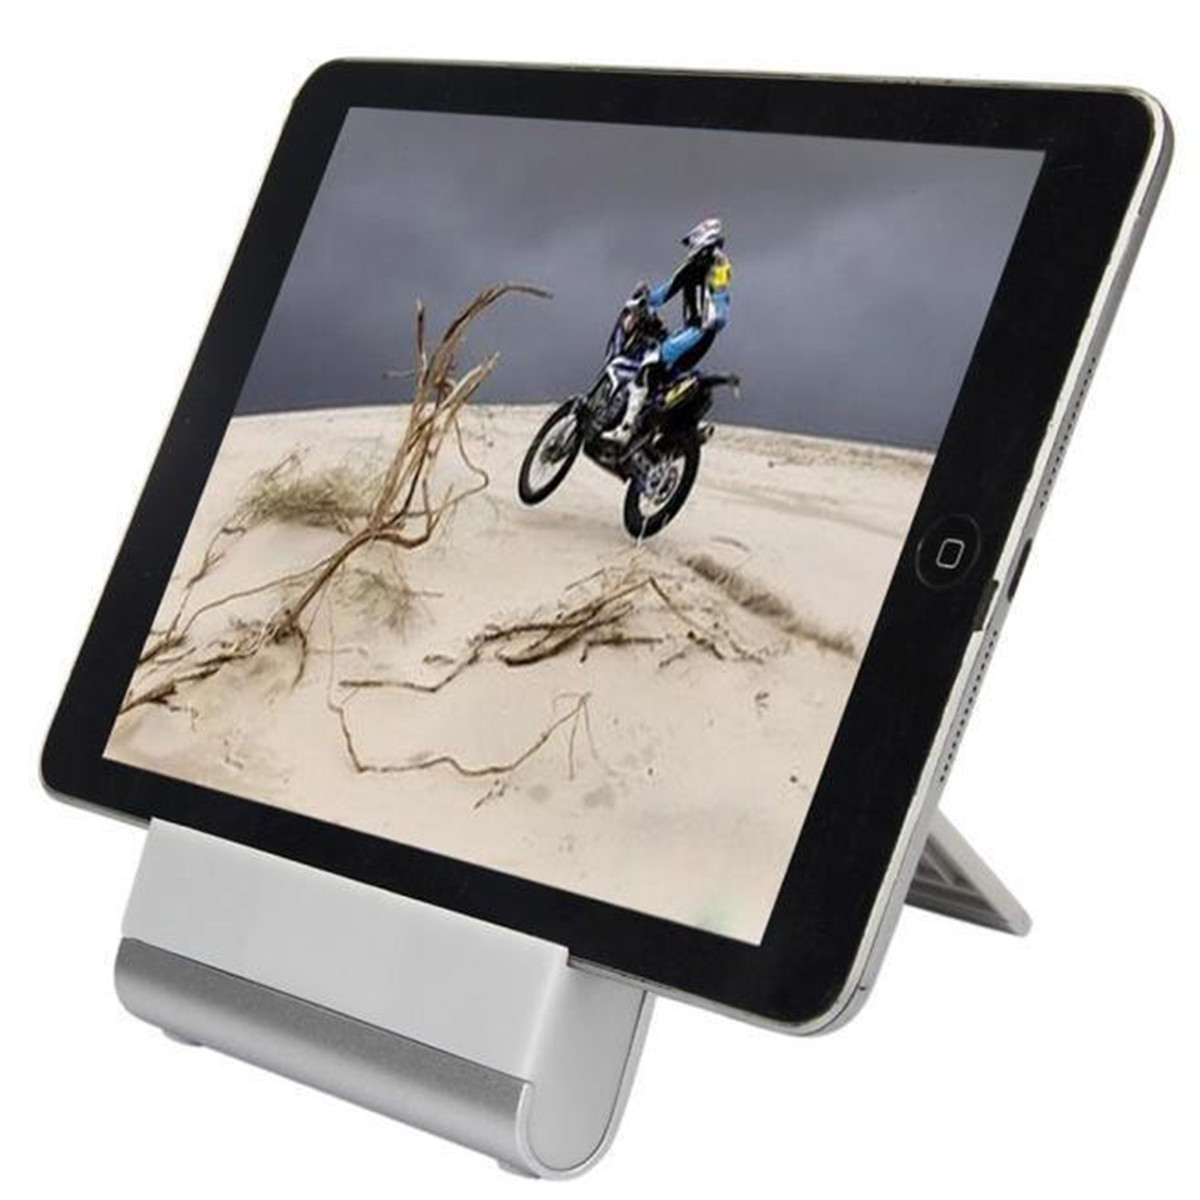 Aluminum-Alloy-Phone-Charging-Holder-Tablet-Stand-For-Smart-PhoneTablet-PCiPhoneiPad-1301330-3